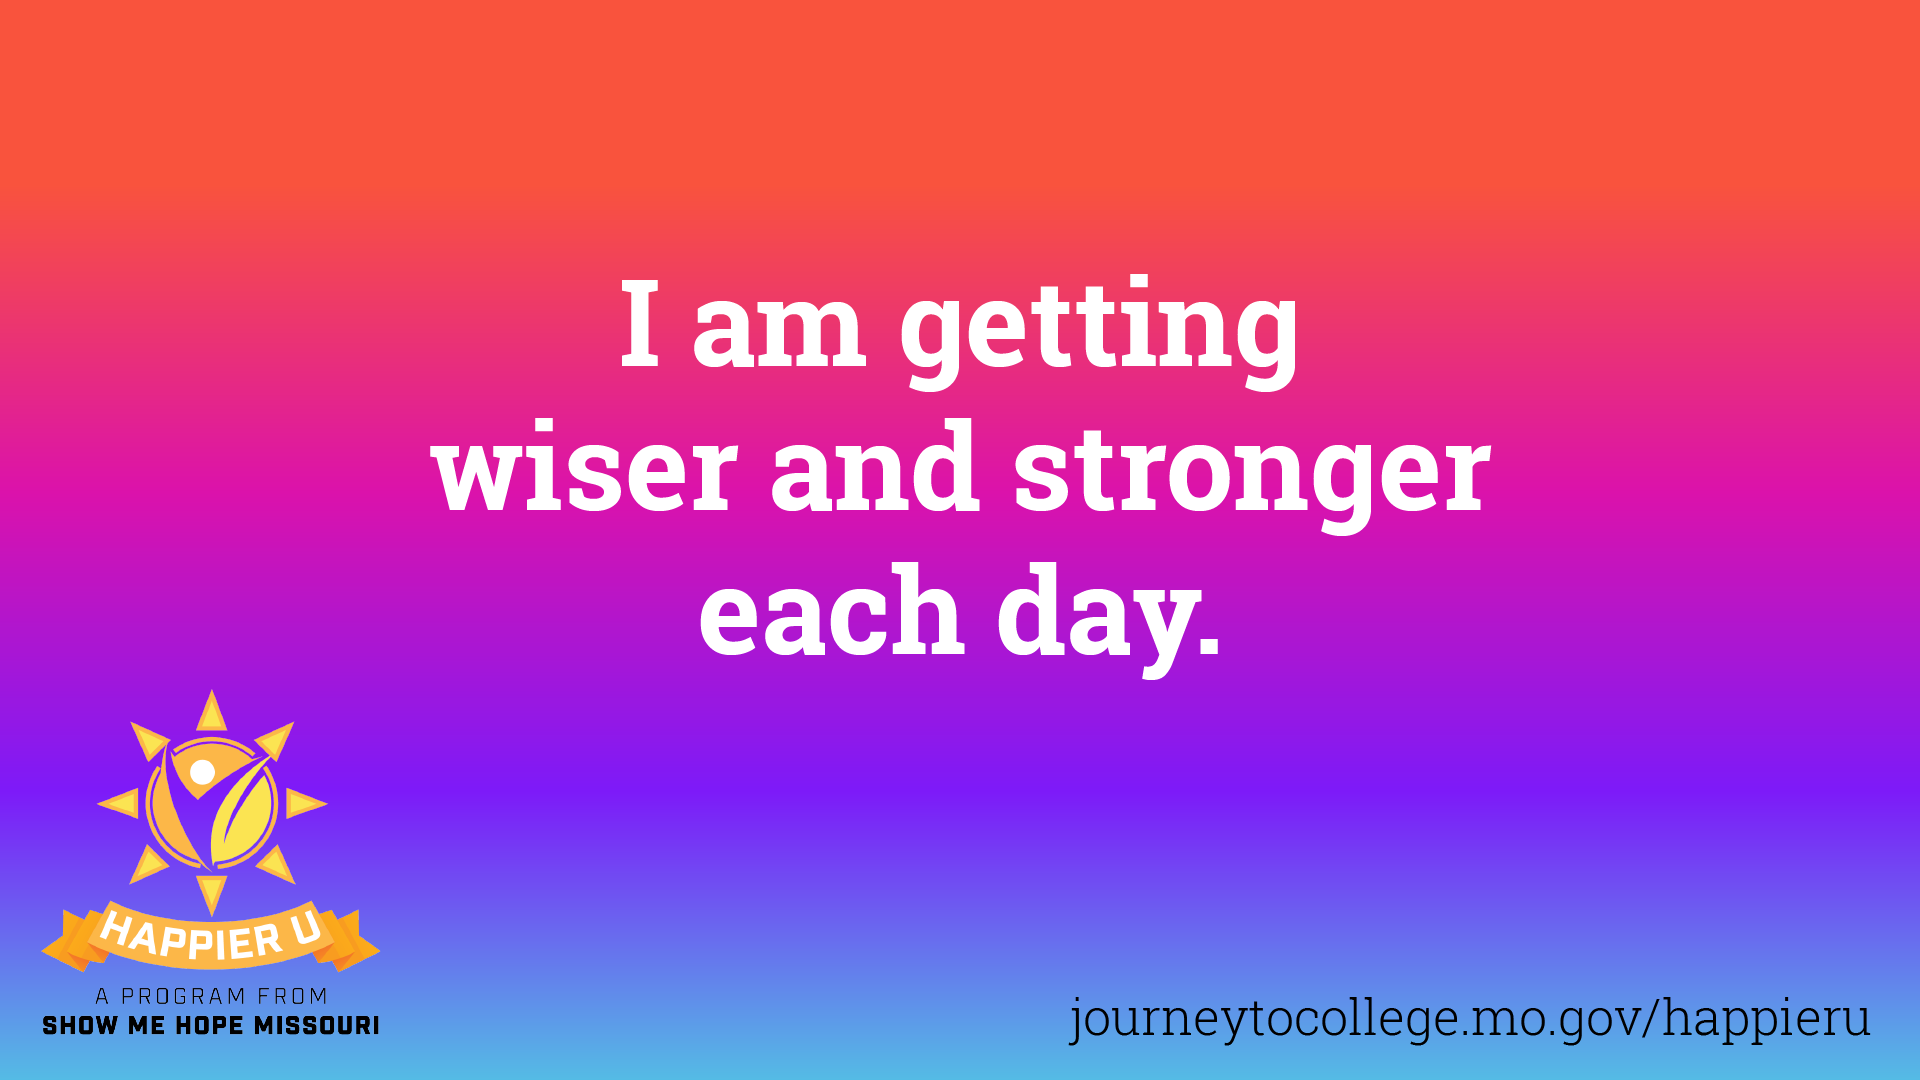 "I am getting wiser and stronger each day"